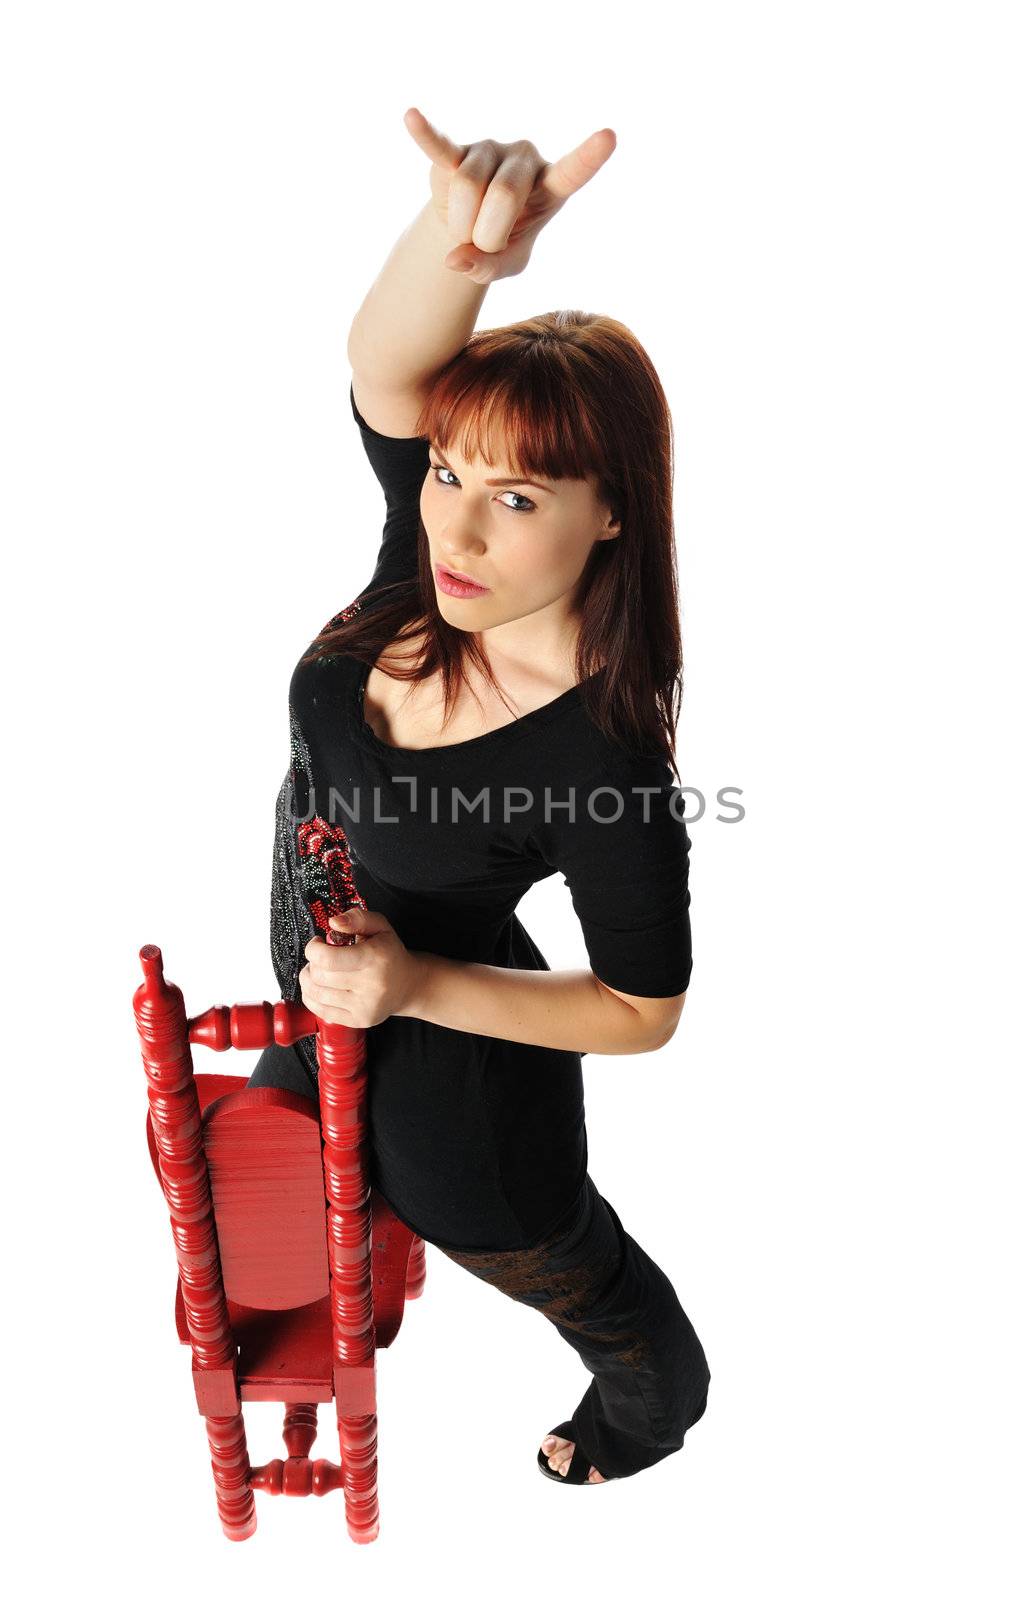 attractive young model having fun posing on a white background